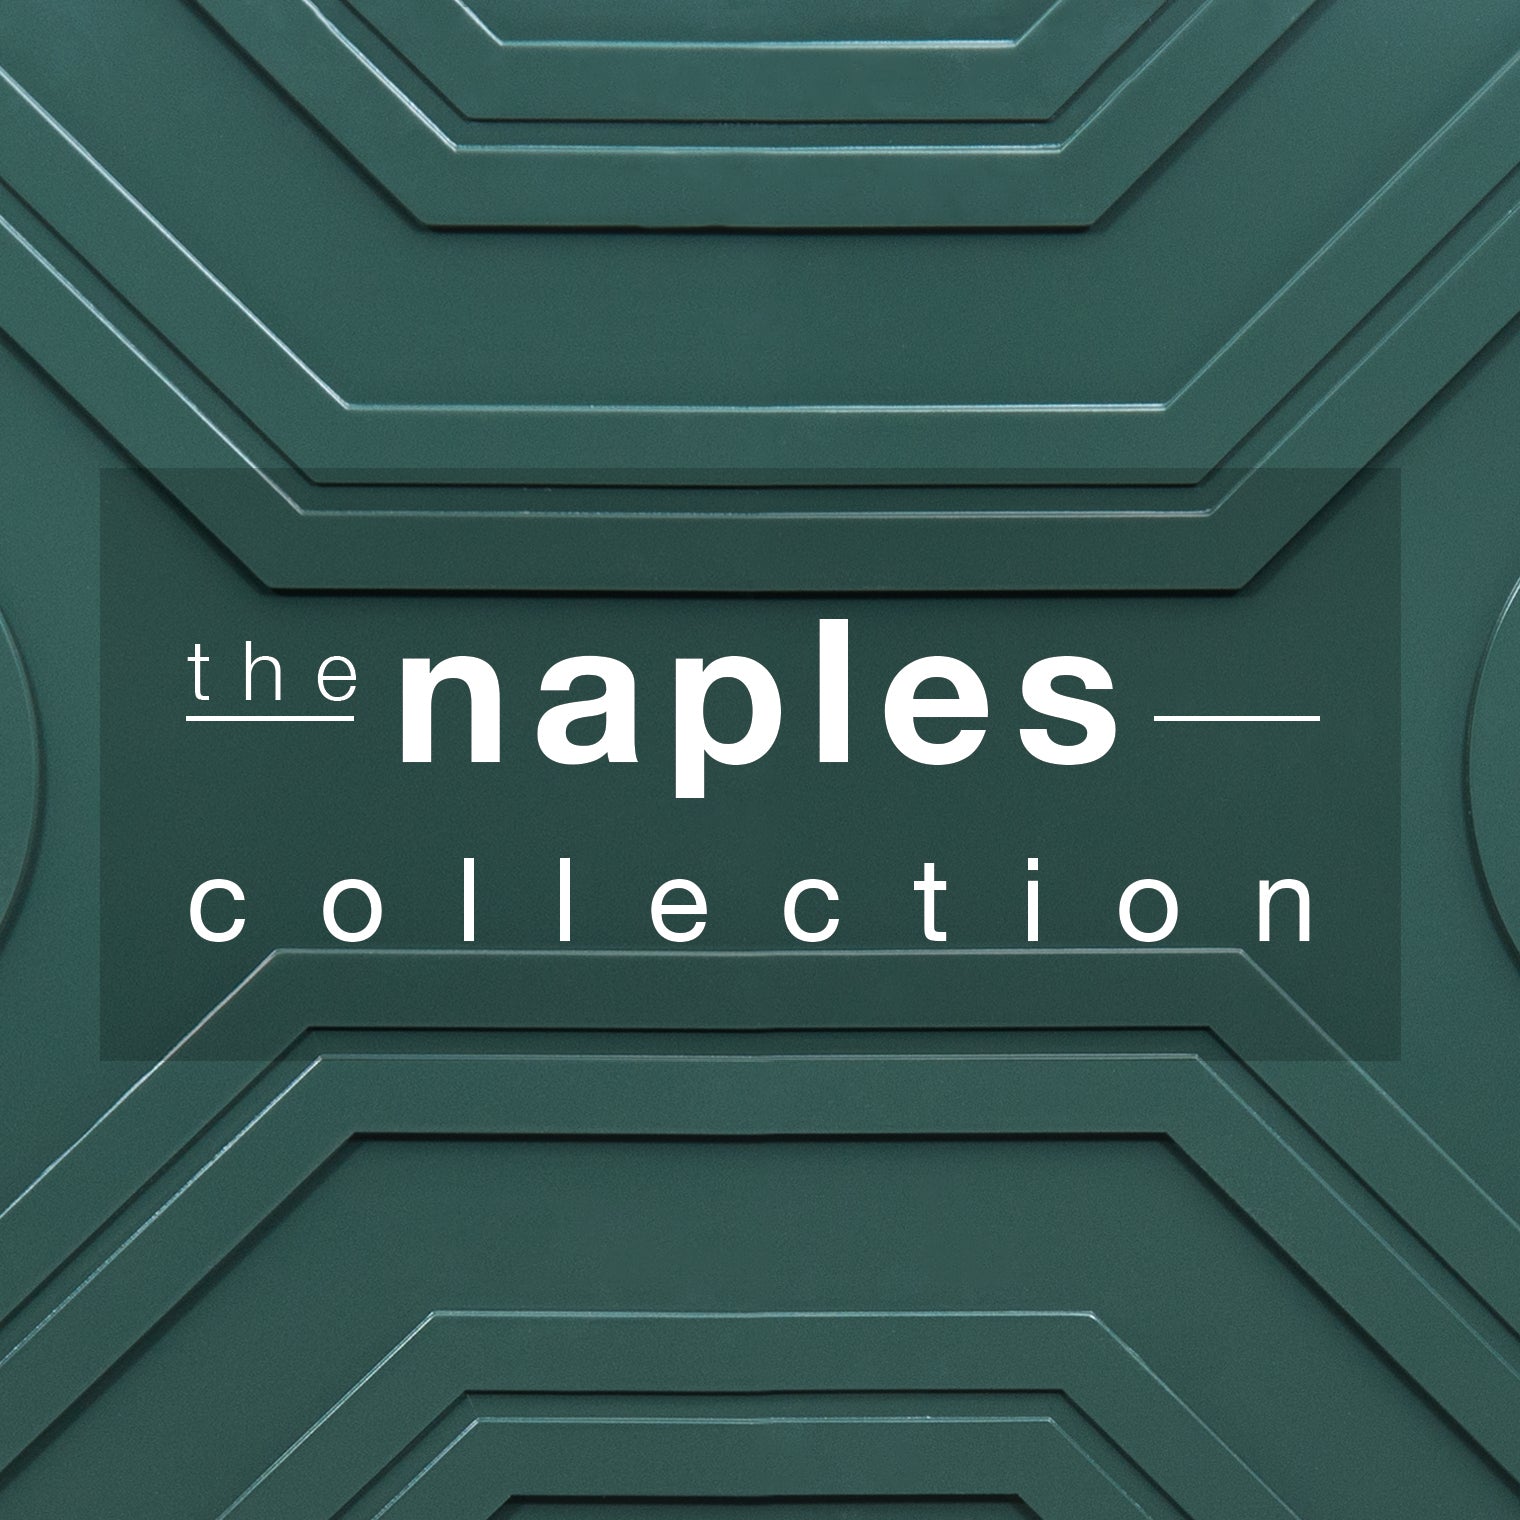 Naples Collection